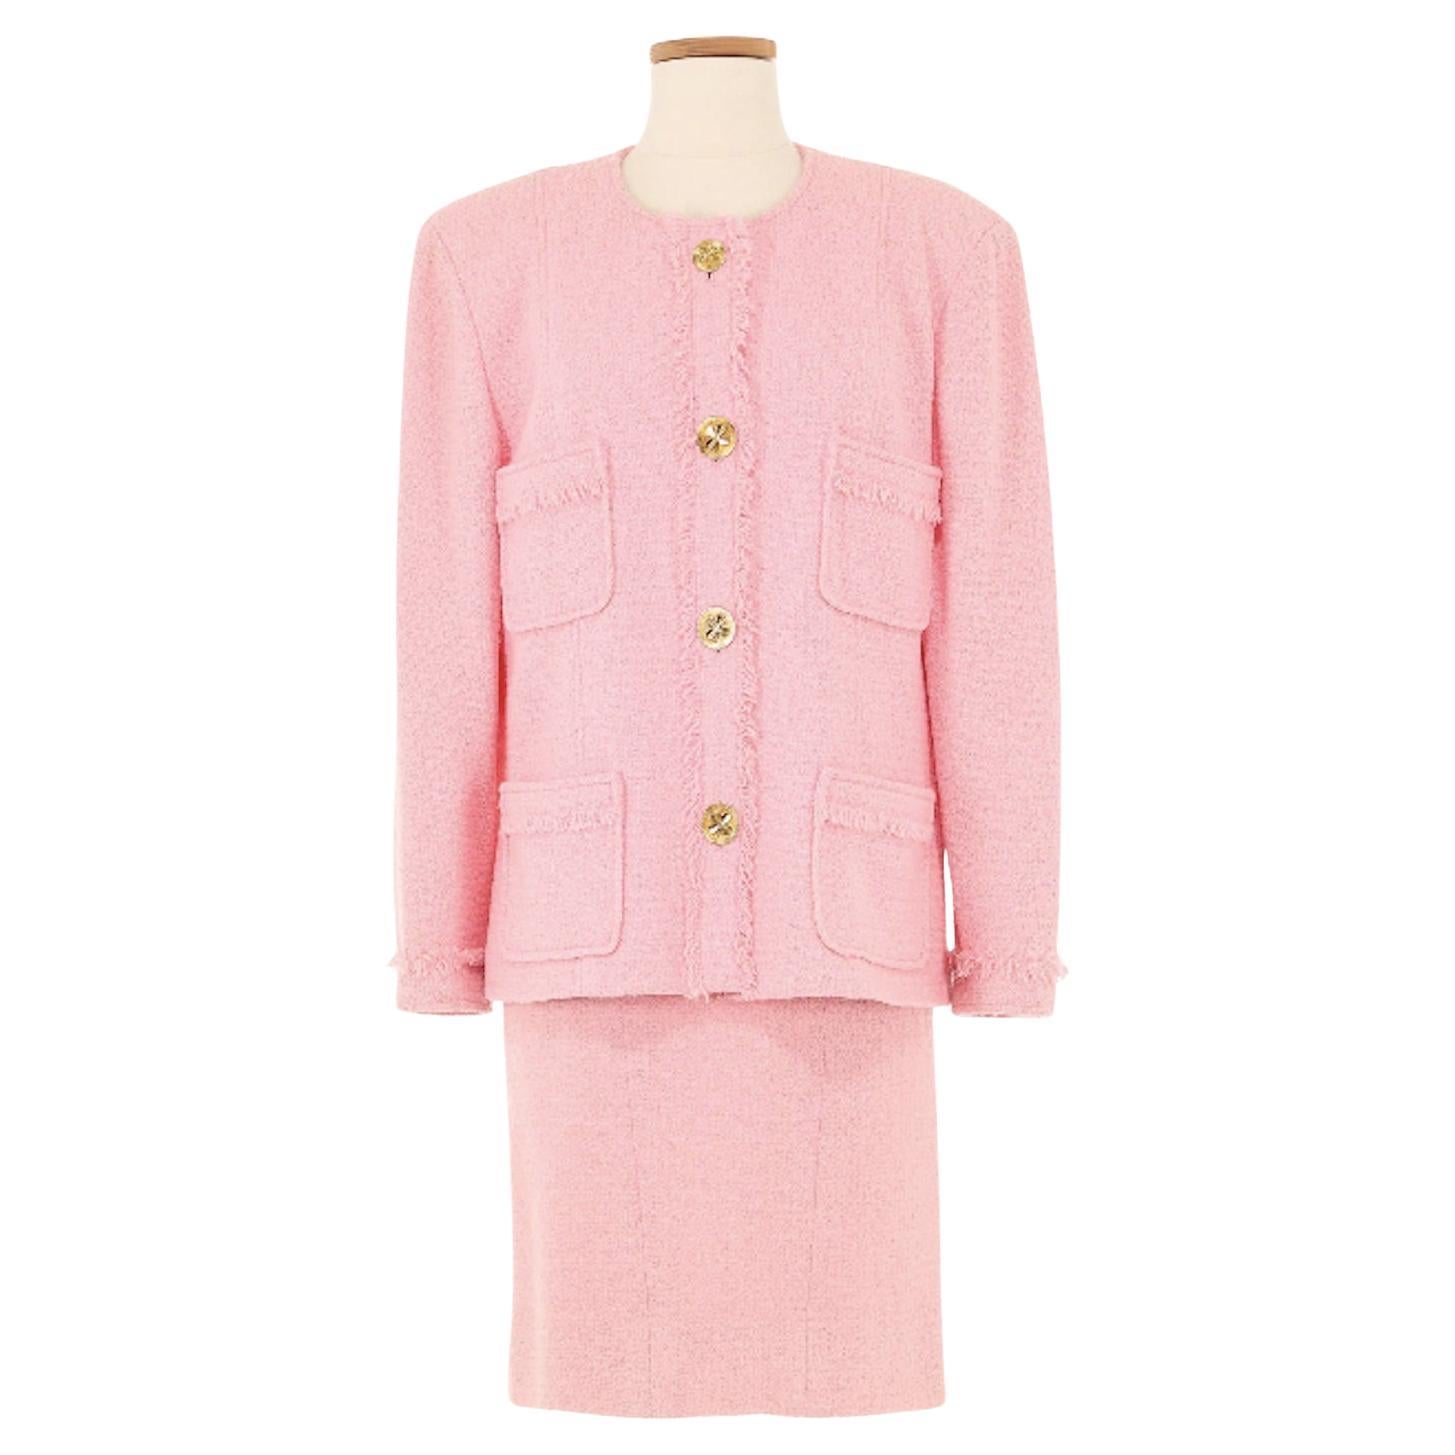 Chanel Fall 1990 Pink Skirt Suit with Clover Buttons For Sale